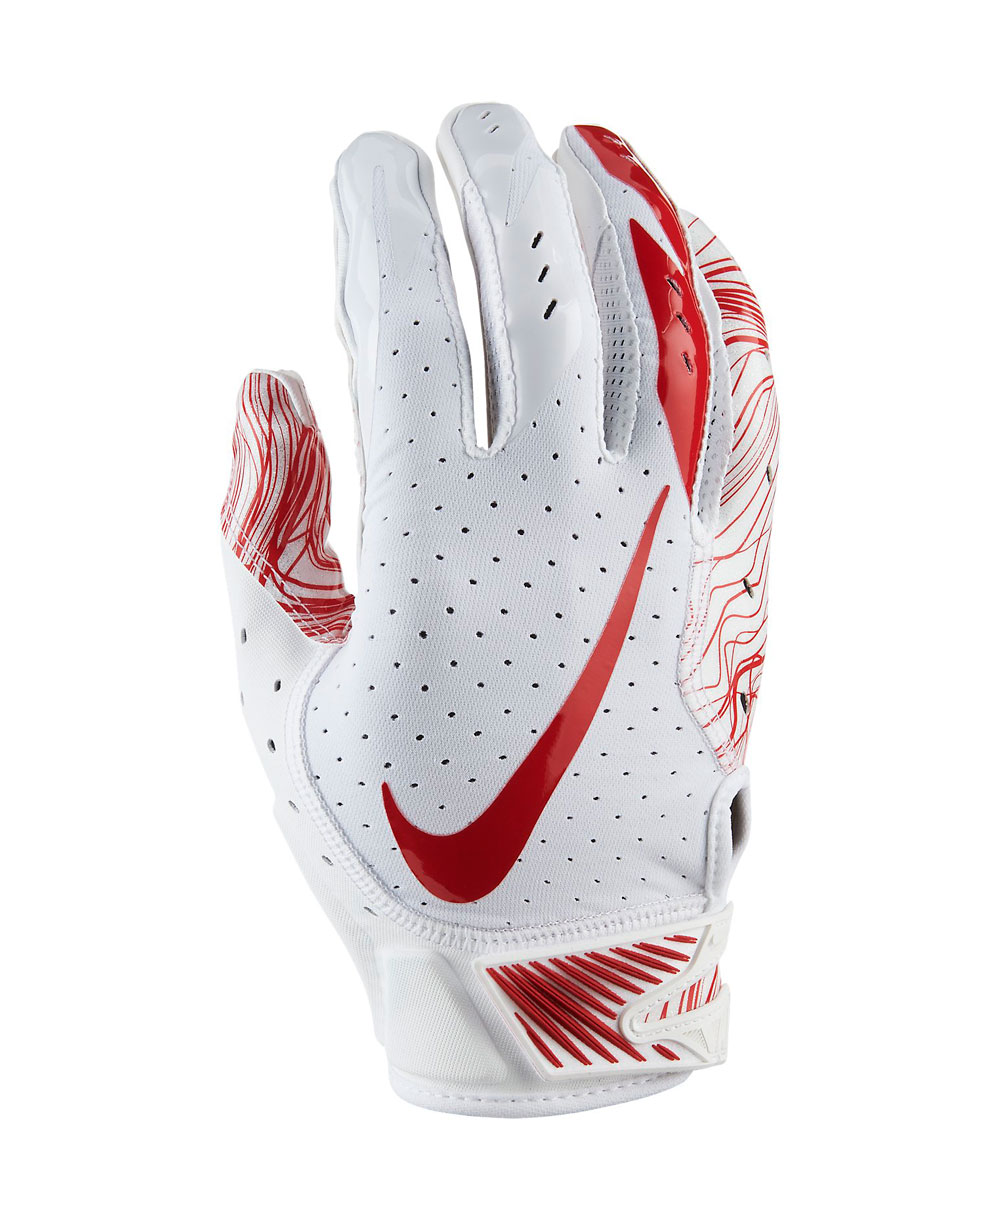 nike football gloves red and white